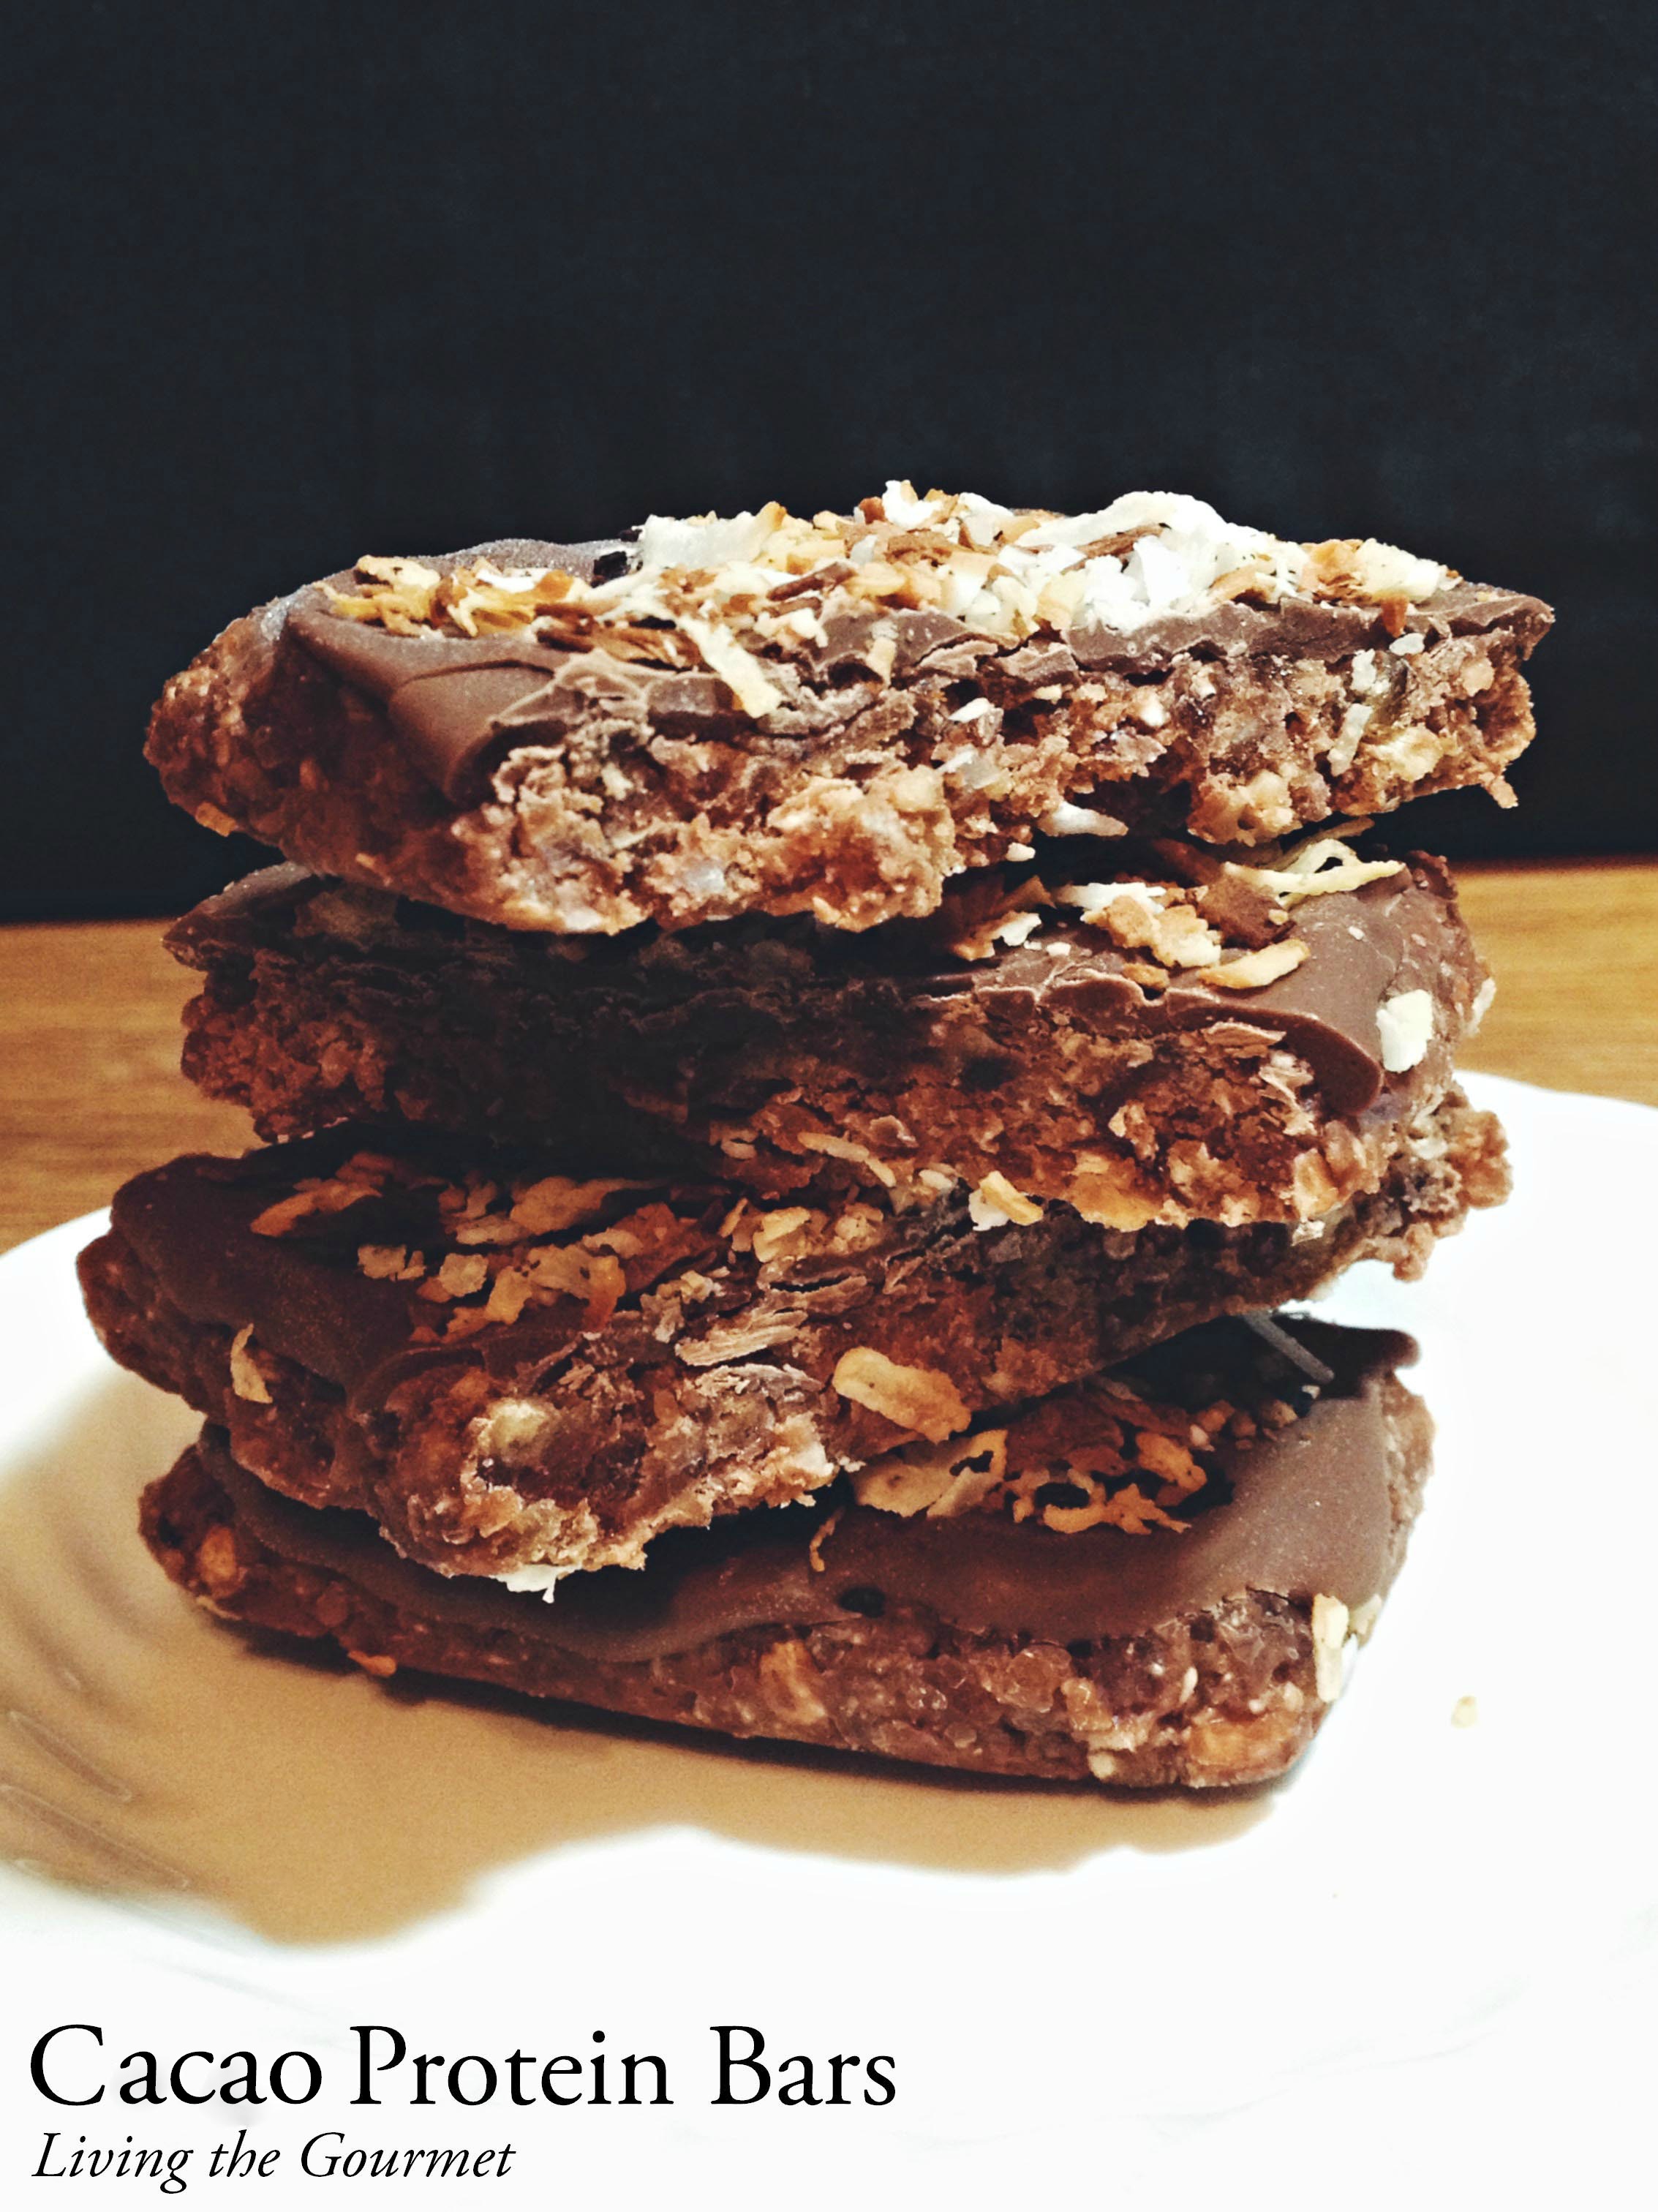 Living the Gourmet: Cocoa Protein Bars